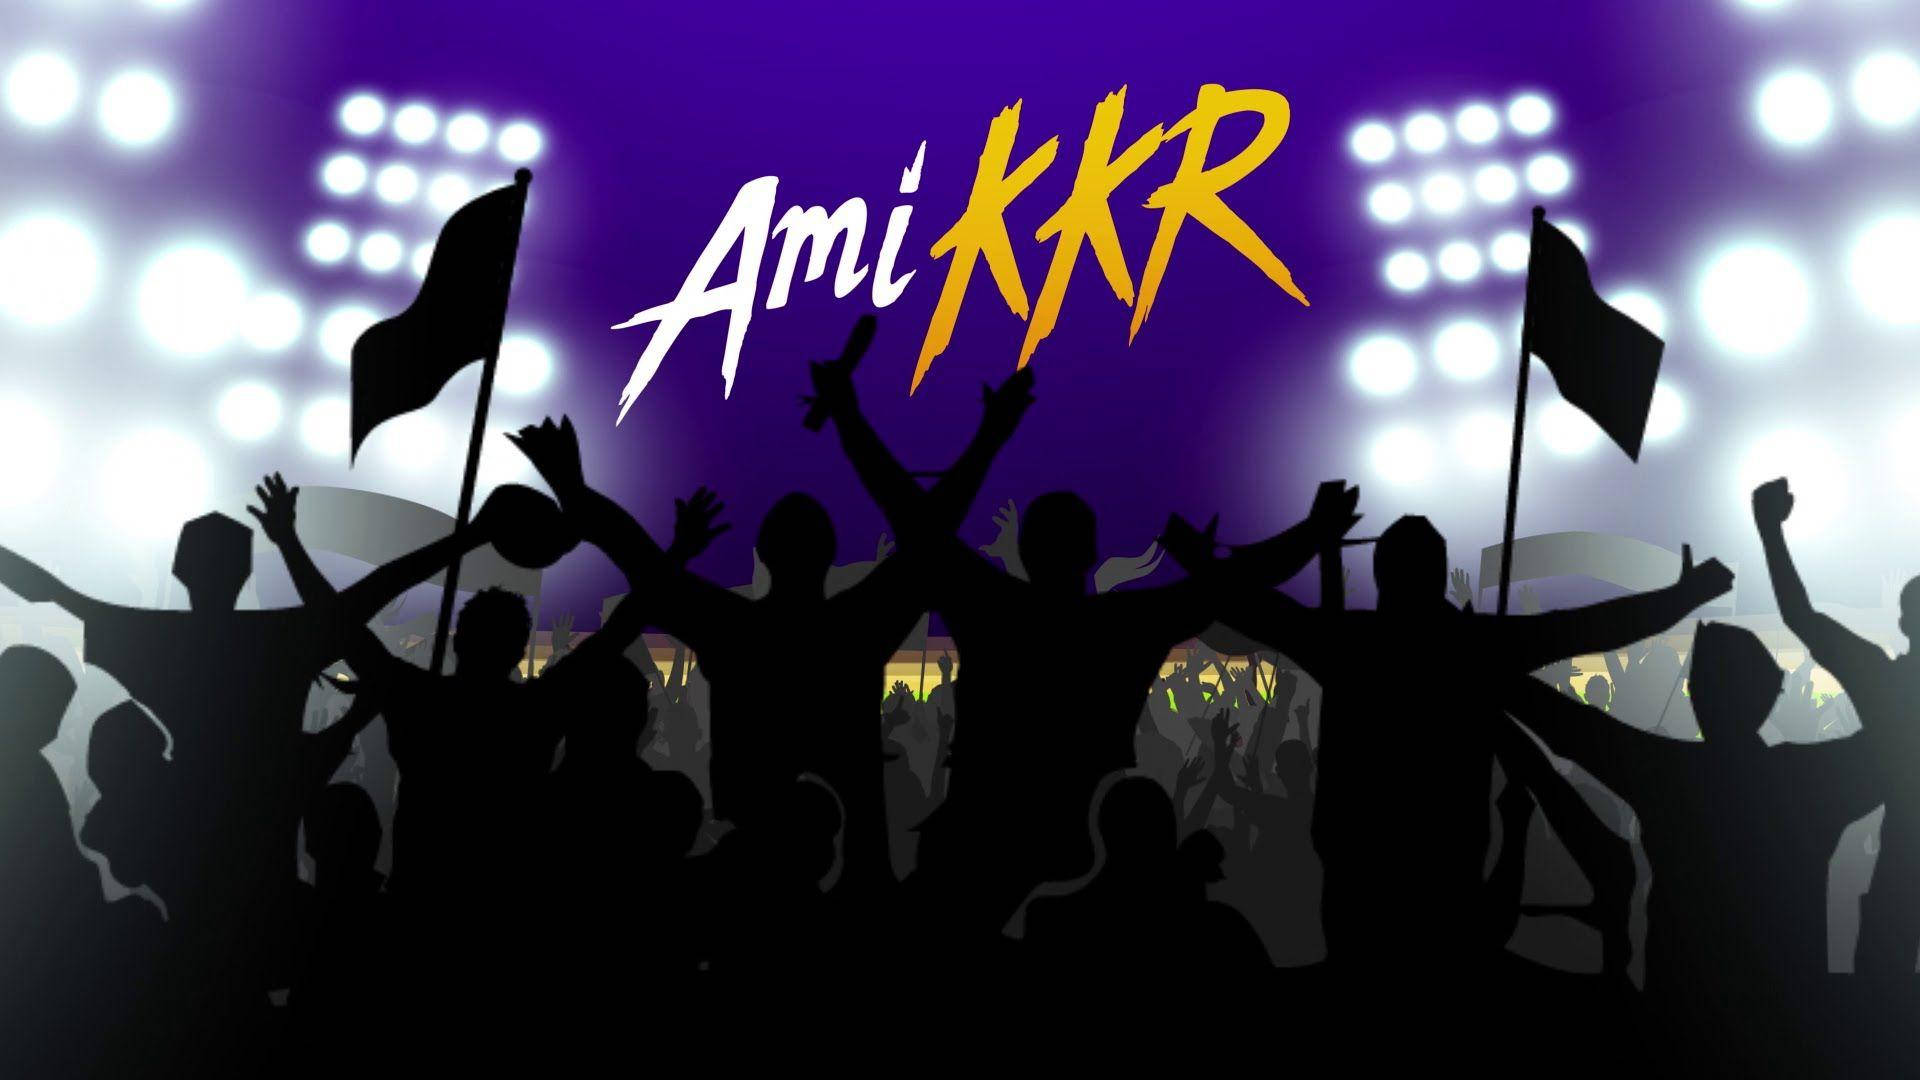 Kolkata Knight Riders - Check out the downloads section on our website at  http://goo.gl/Khydq for KKR wallpapers, cover photos and more! | Facebook